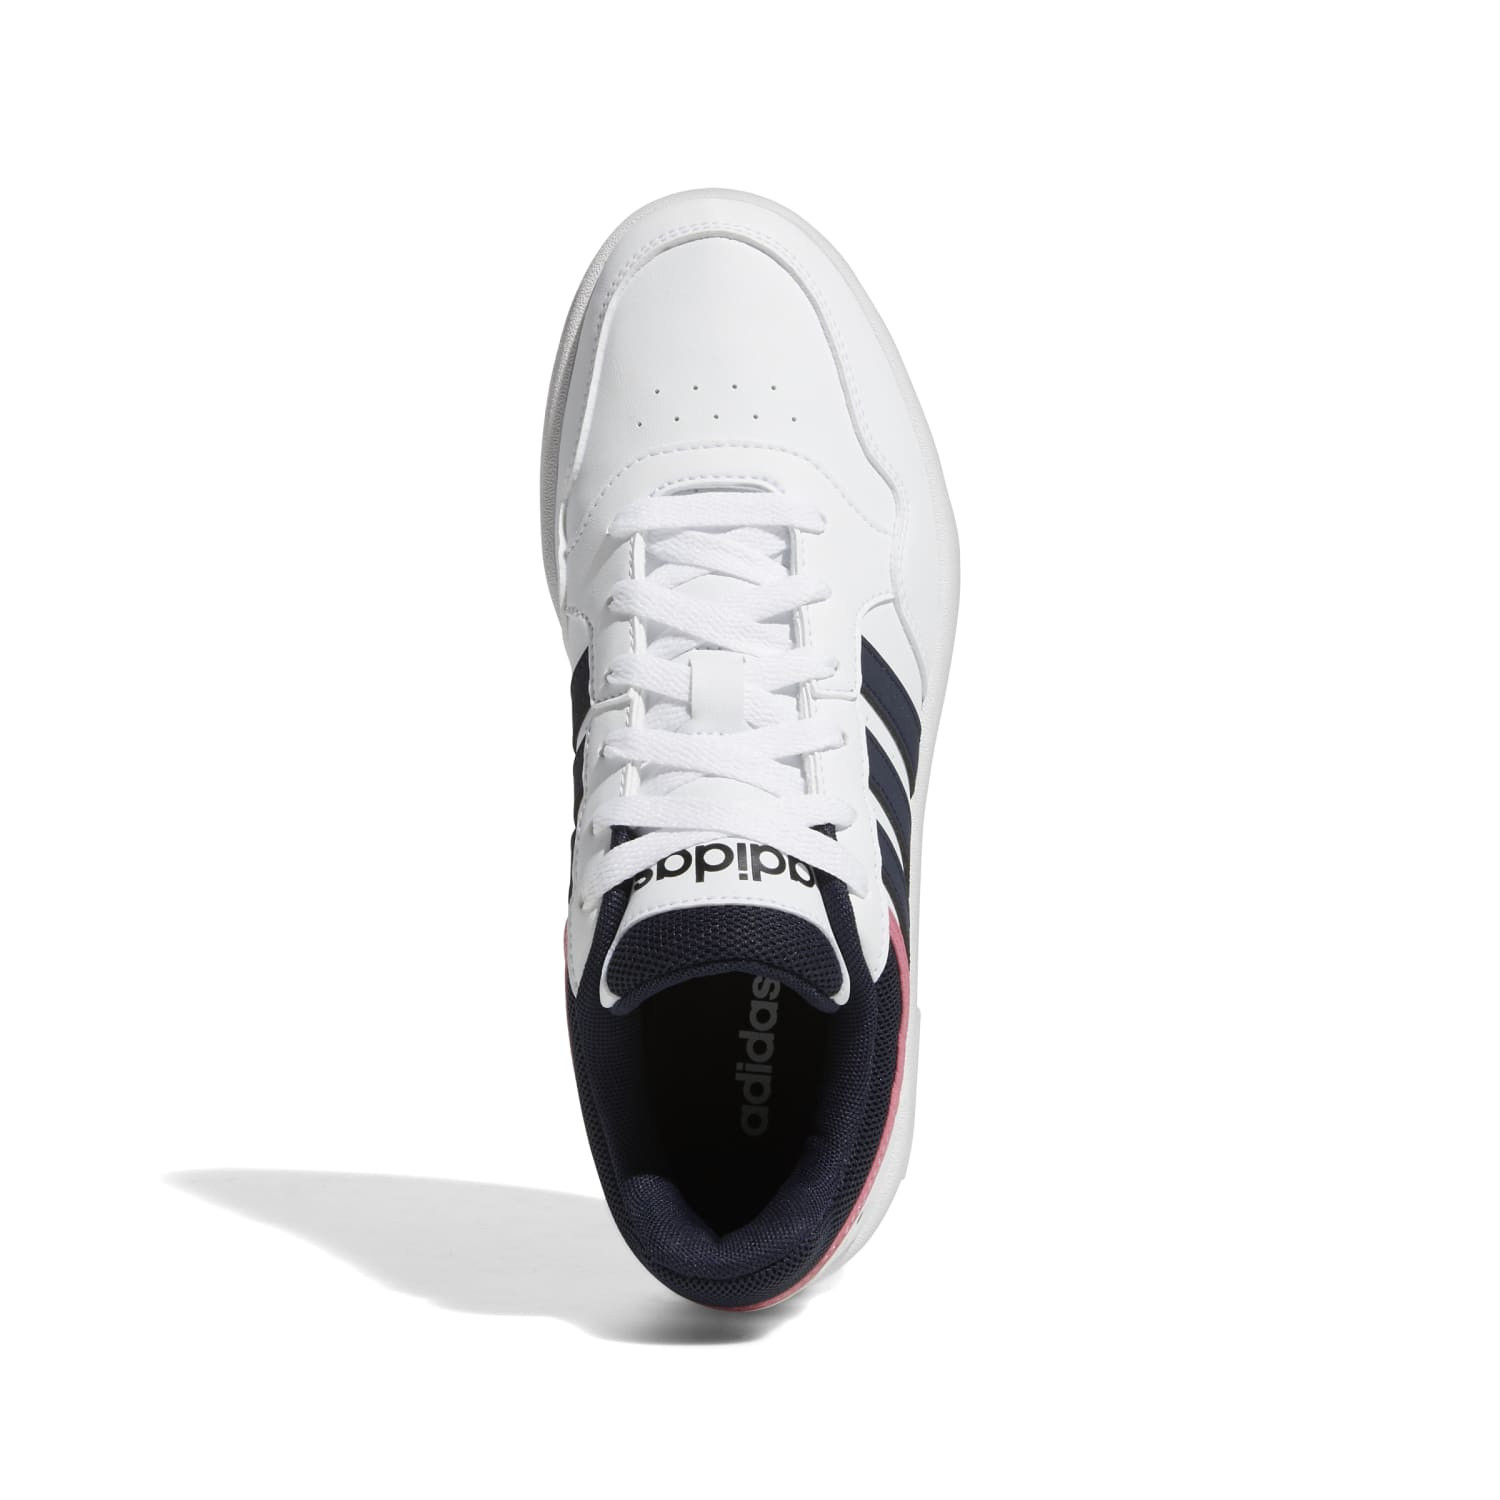 Adidas - Hoops 3.0 Low Classic Shoes, White, large image number 2